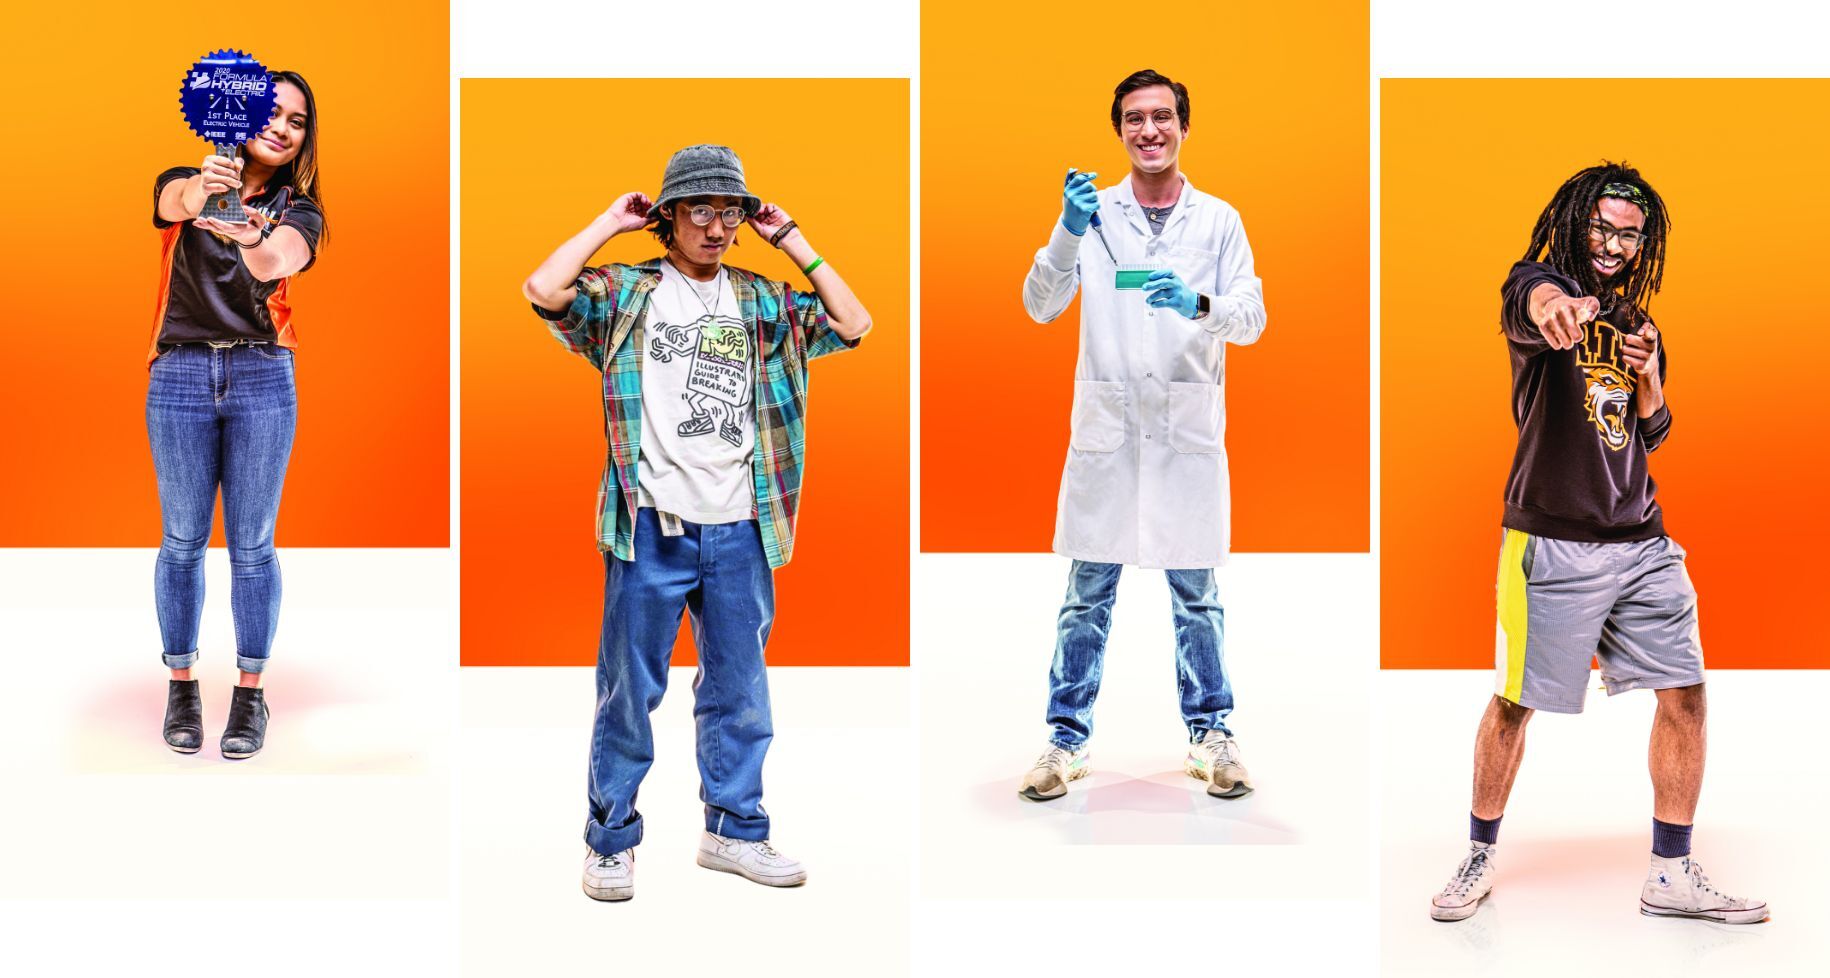 Four students standing in front of orange backgrounds posing